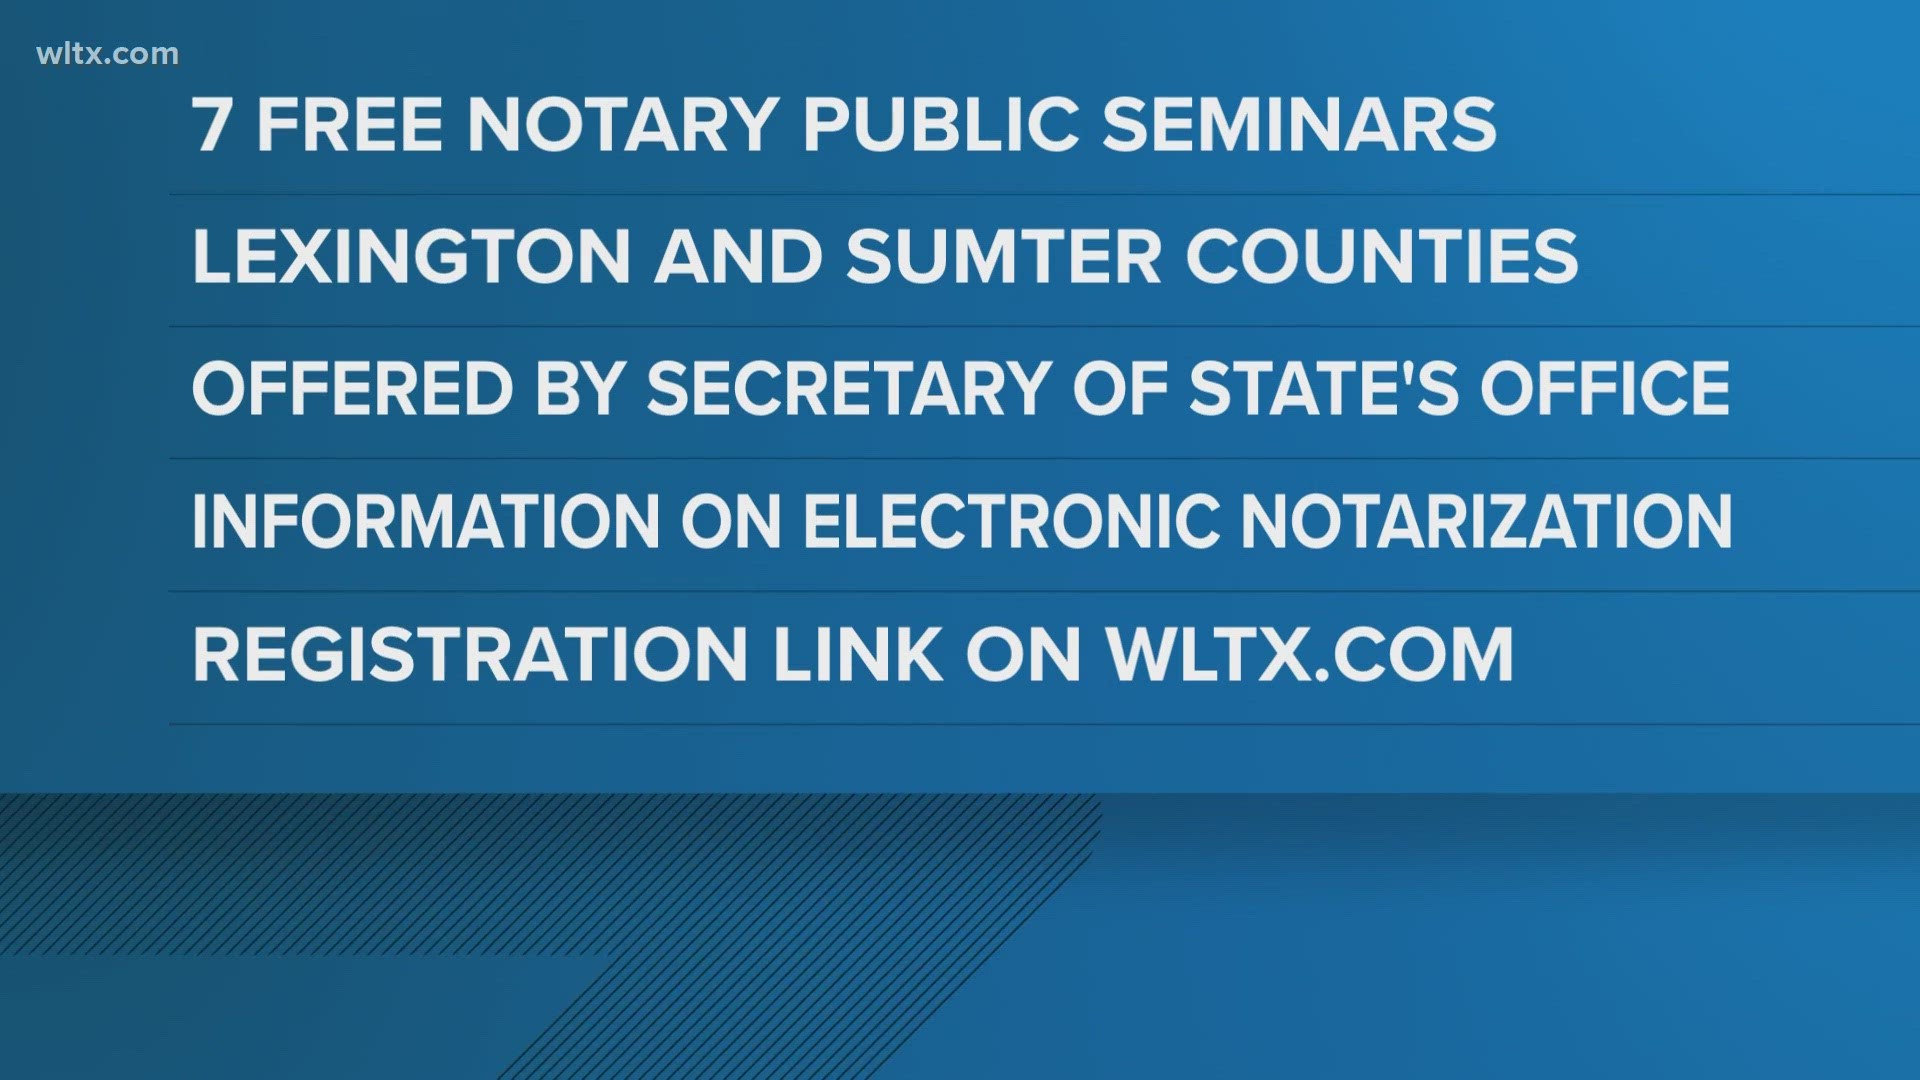 Secretary of State Mark Hammond will be offering seven free regional notary public seminars for South Carolina notaries and those interested in becoming one.